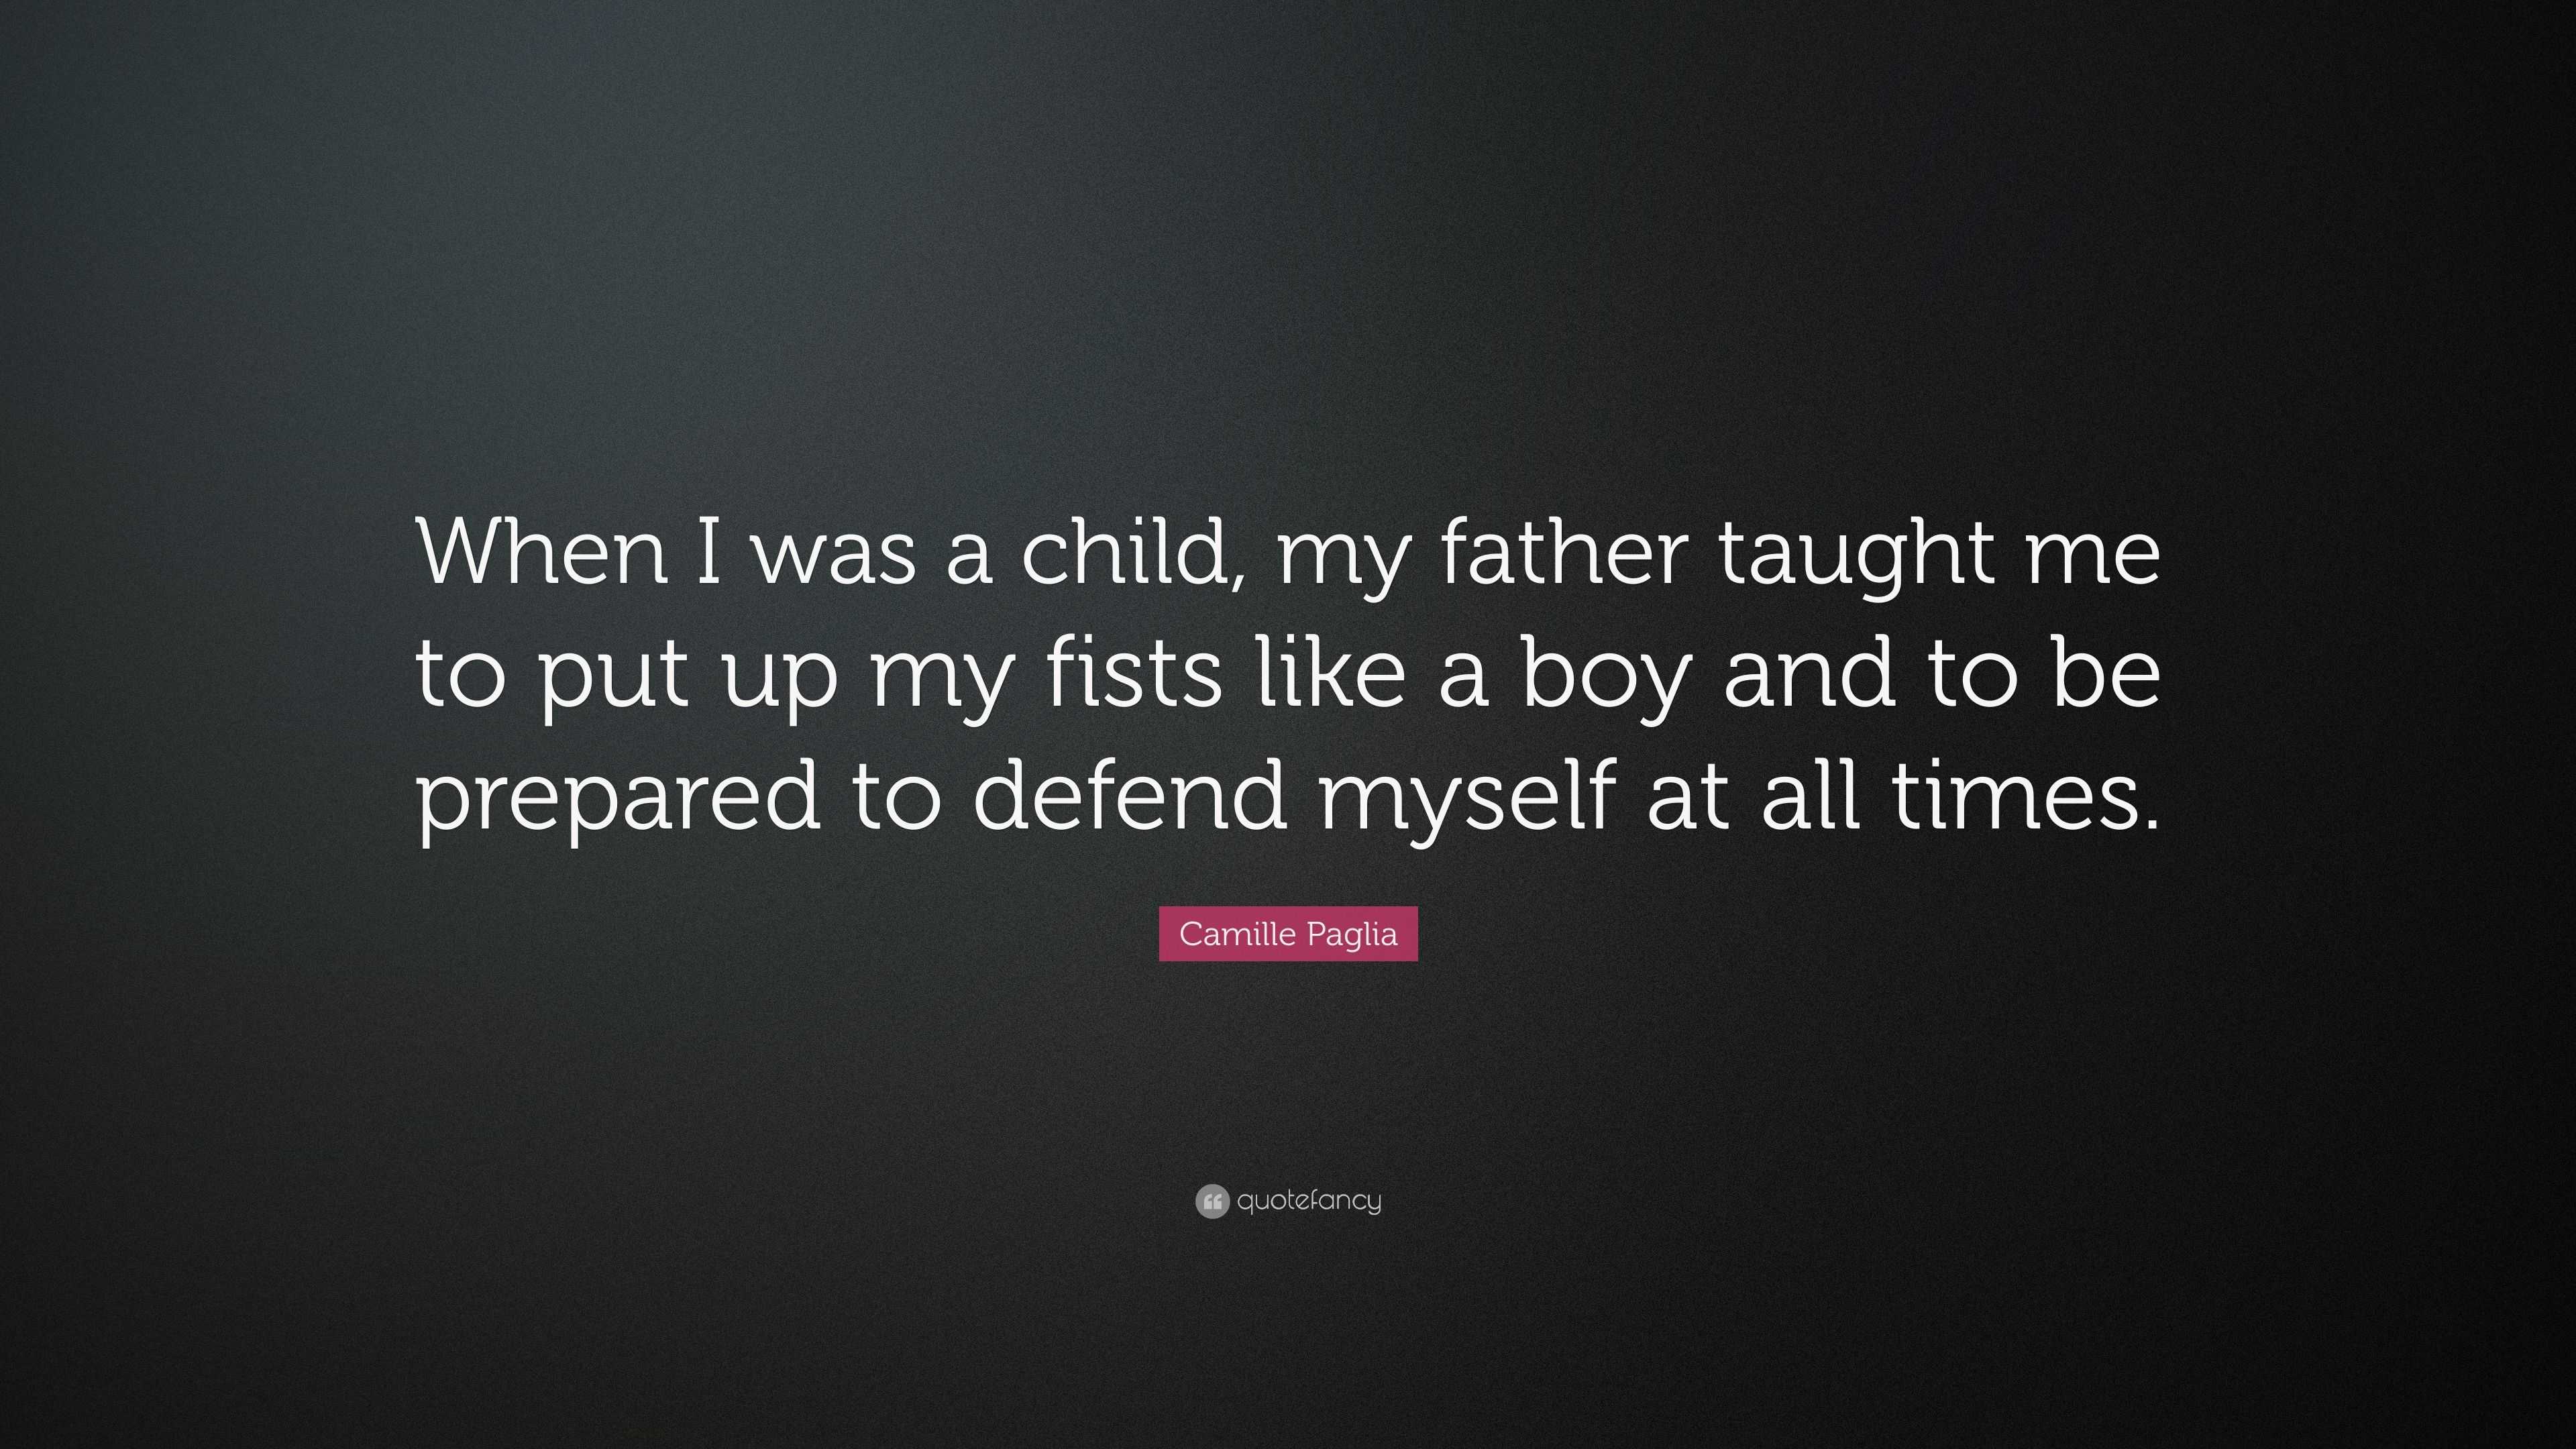 https://quotefancy.com/media/wallpaper/3840x2160/4228831-Camille-Paglia-Quote-When-I-was-a-child-my-father-taught-me-to-put.jpg